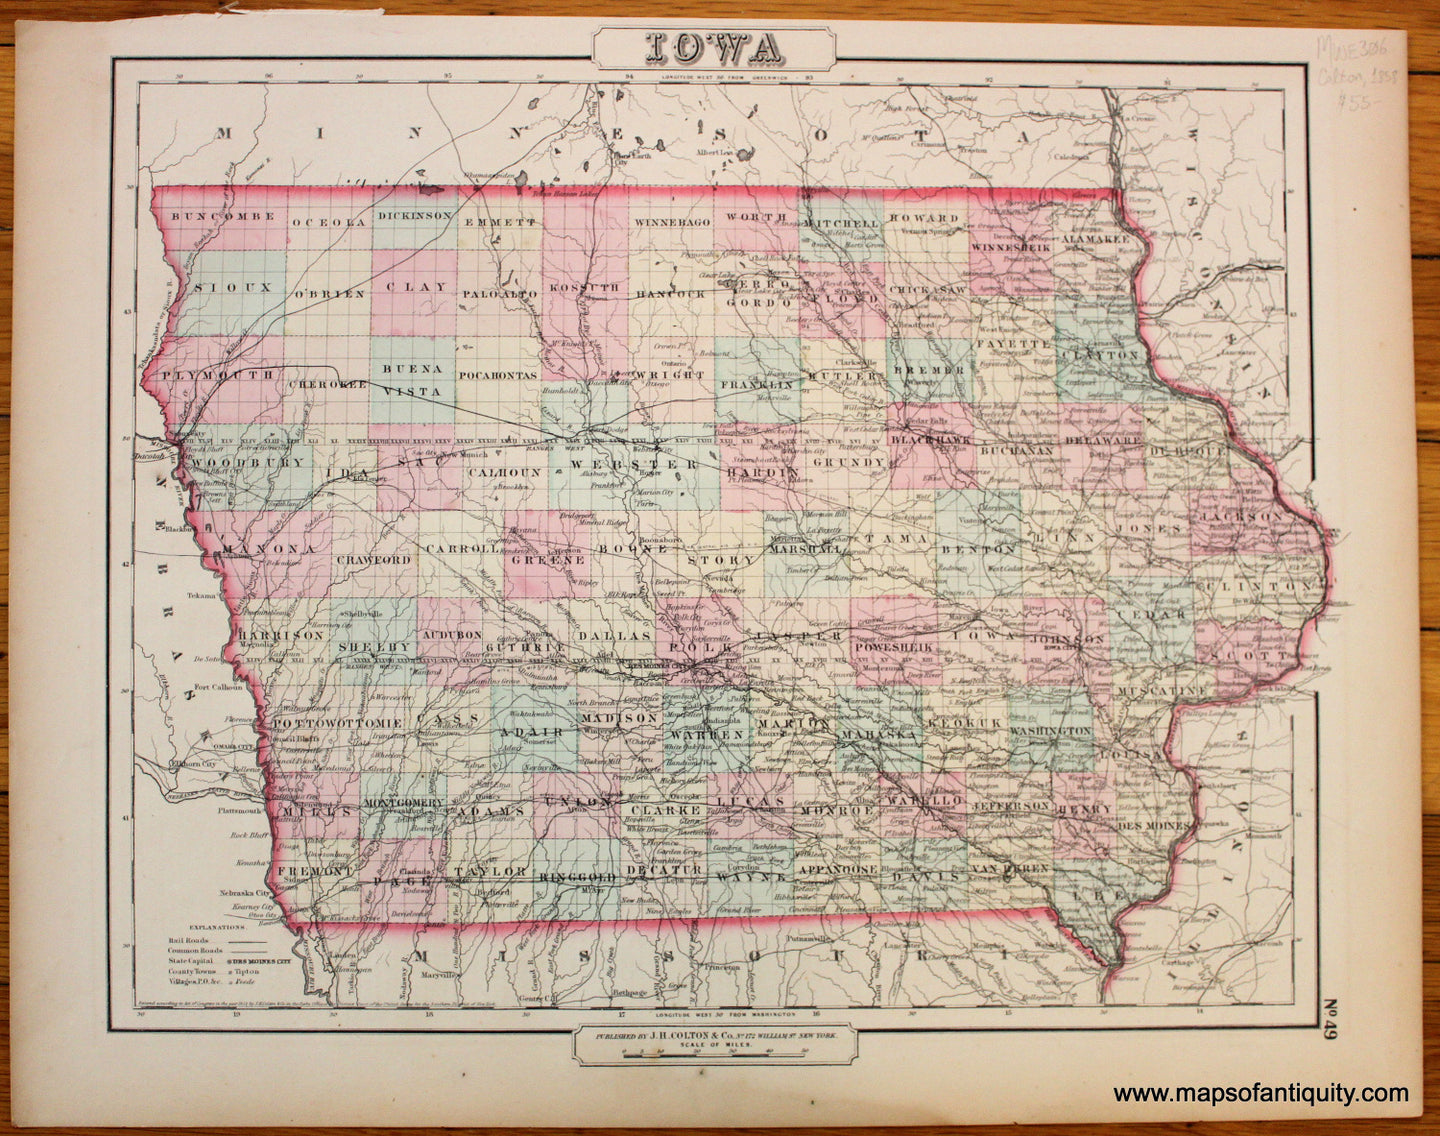 Antique-Hand-Colored-Map-Iowa-******-United-States-Midwest-1858-Colton-Maps-Of-Antiquity